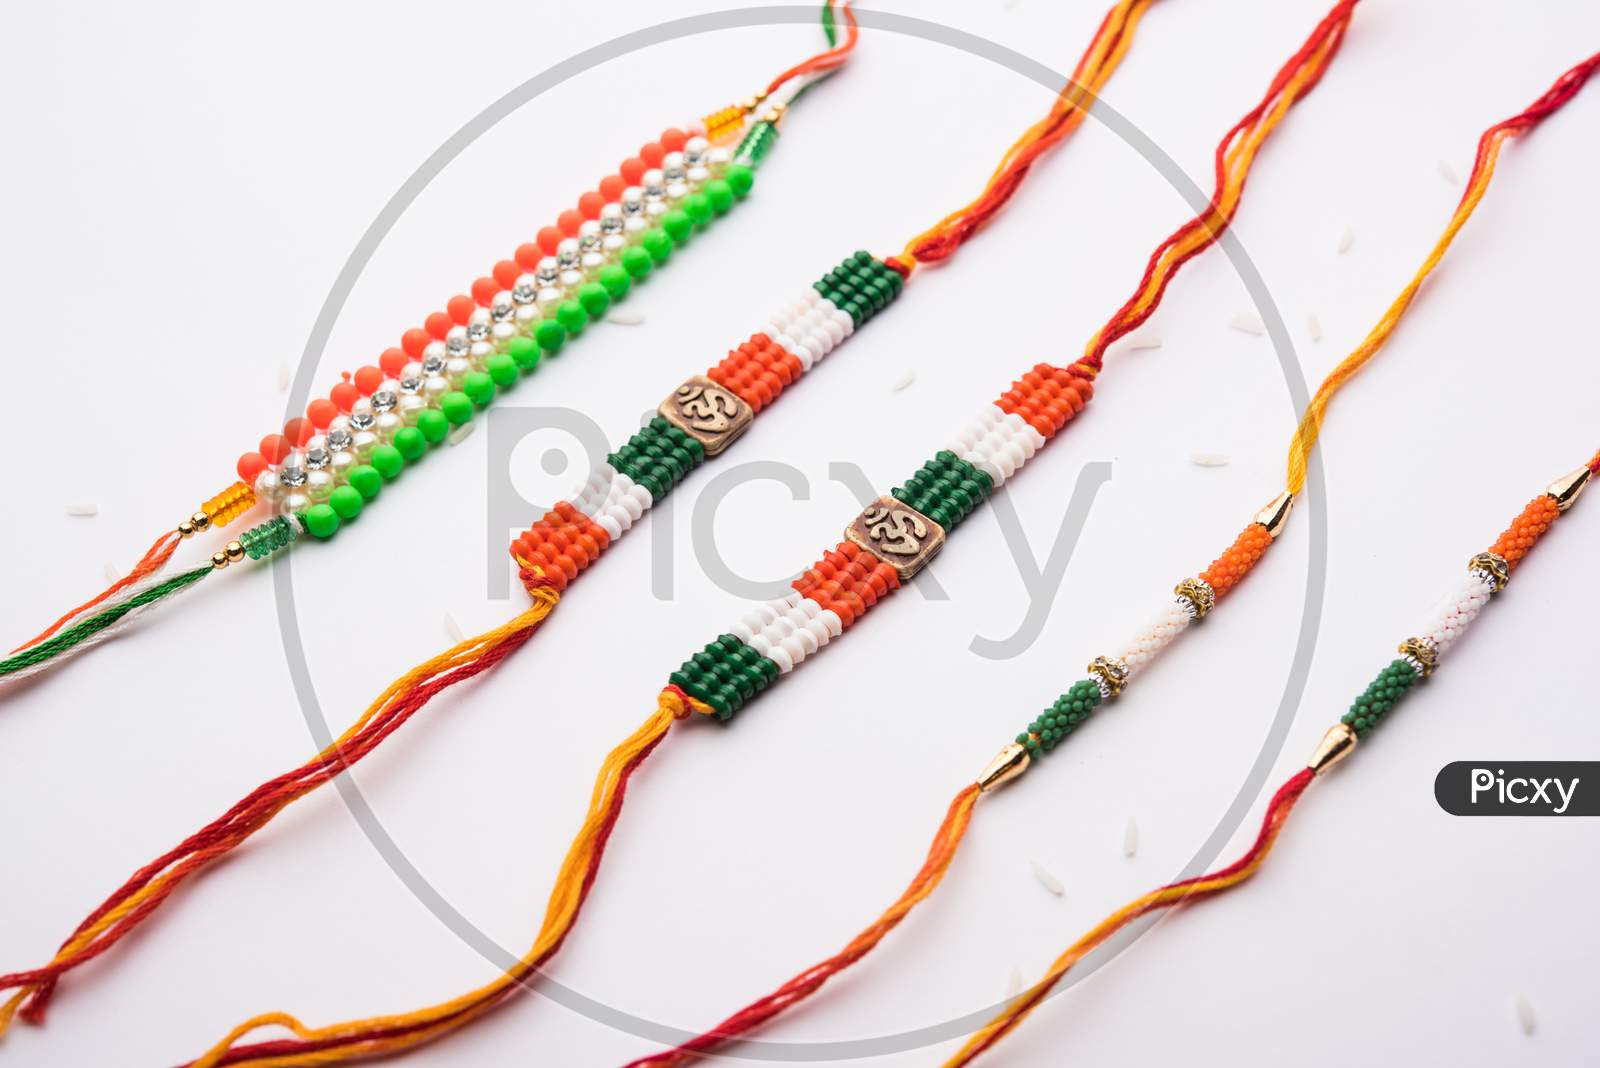 Tricolour Rakhi for Independence Day / Raksha Bandhan which is on the Same Day in 2019